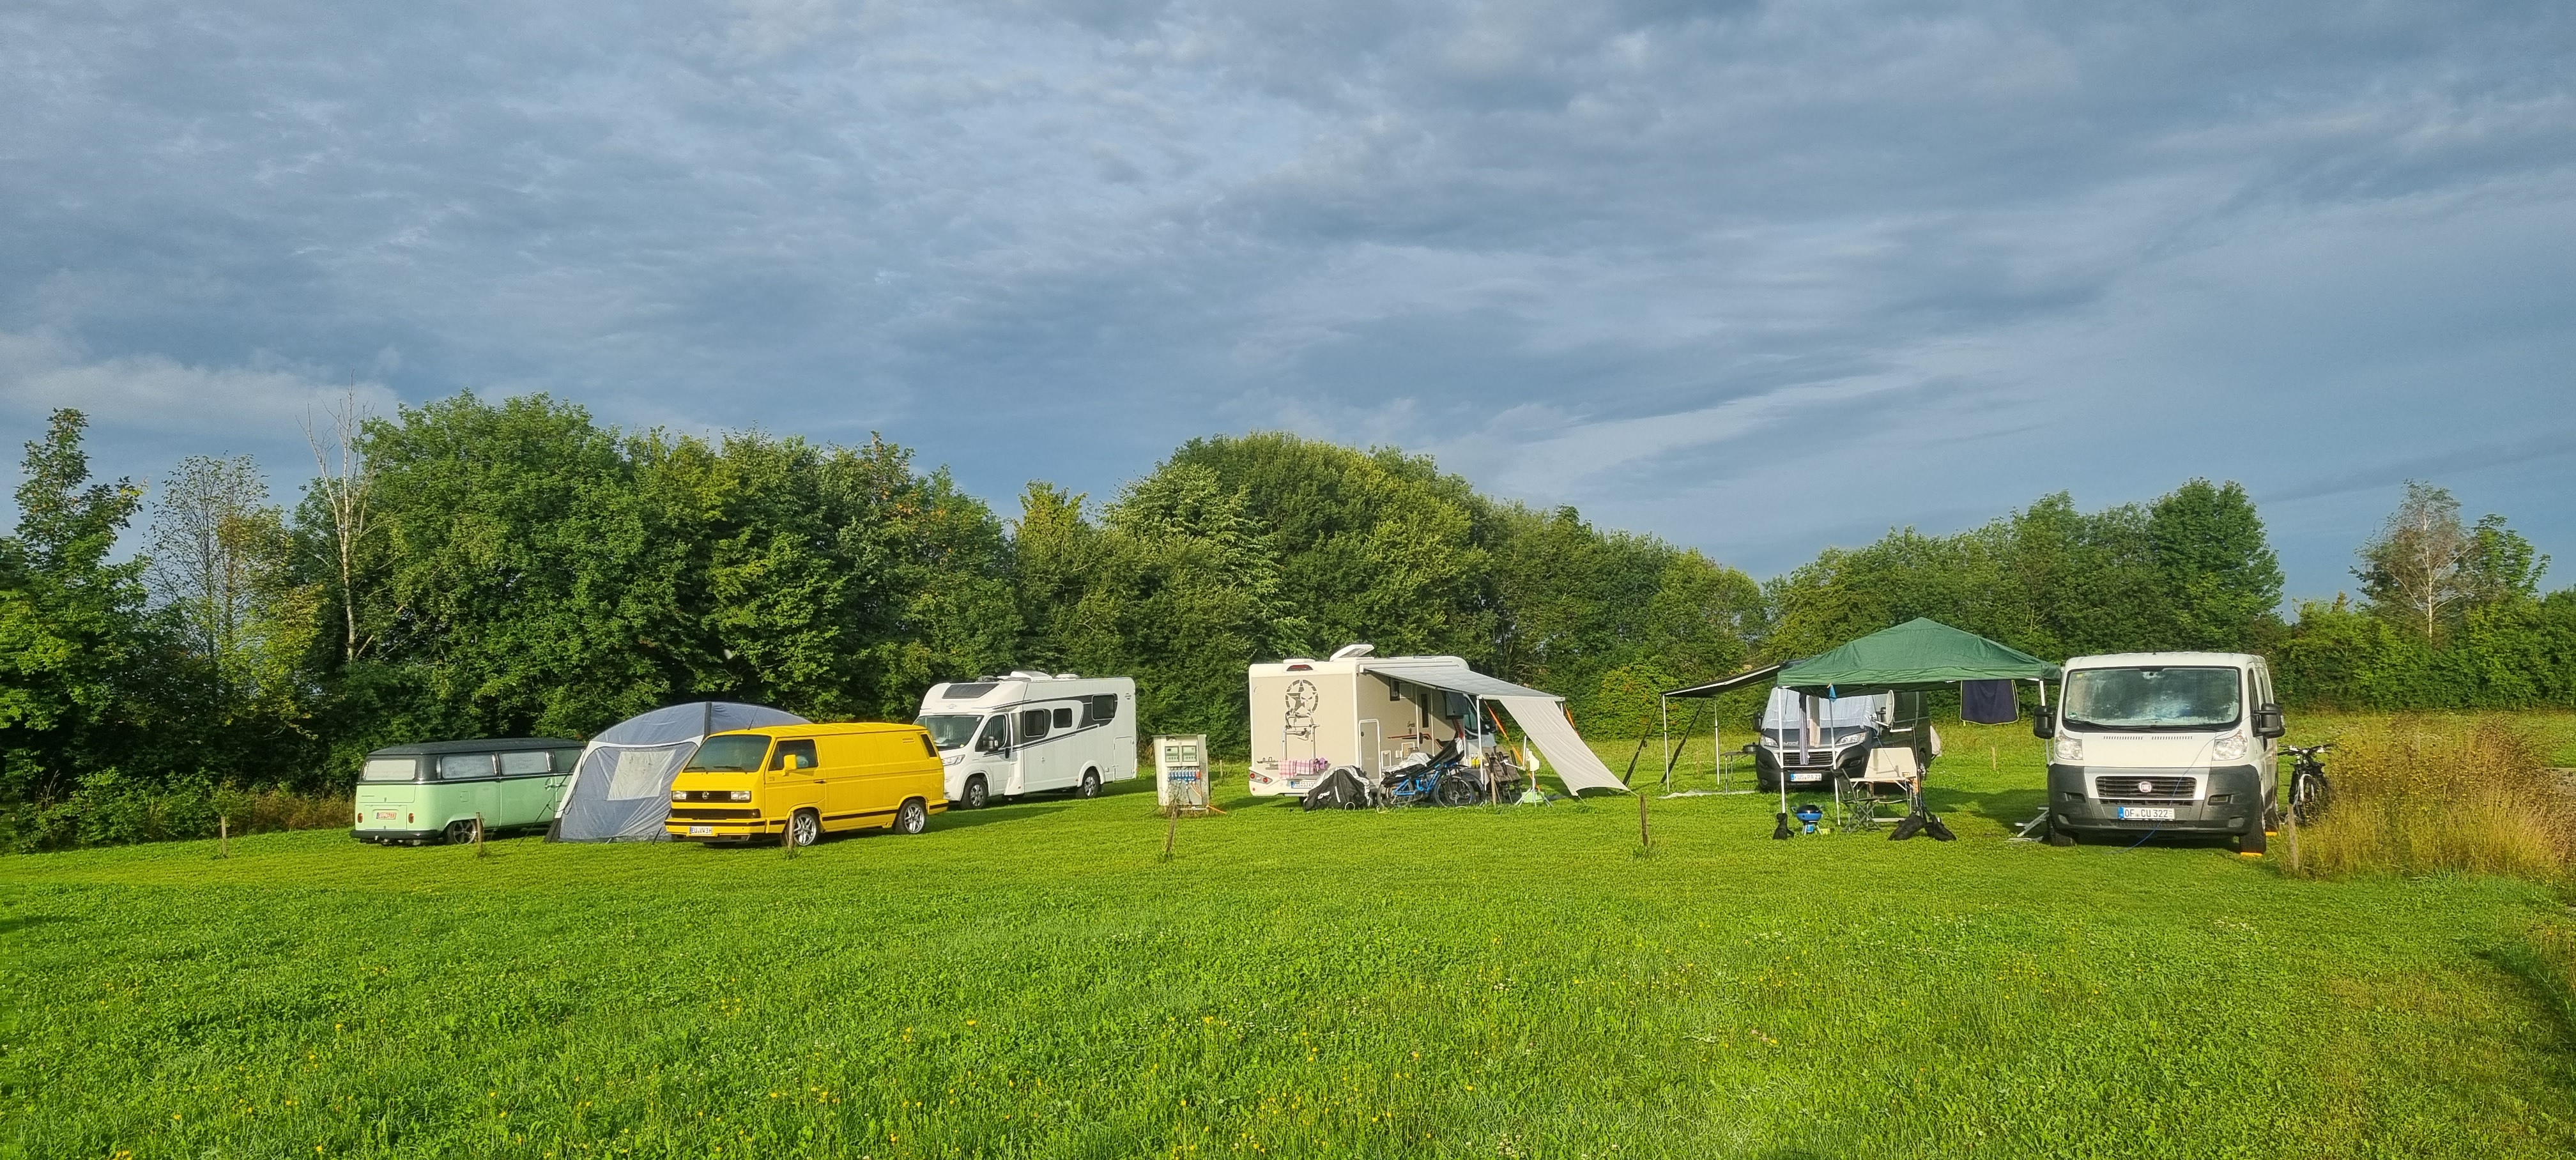 Emplacement - Emplacement Camping-Car - Camping Paradies Franken